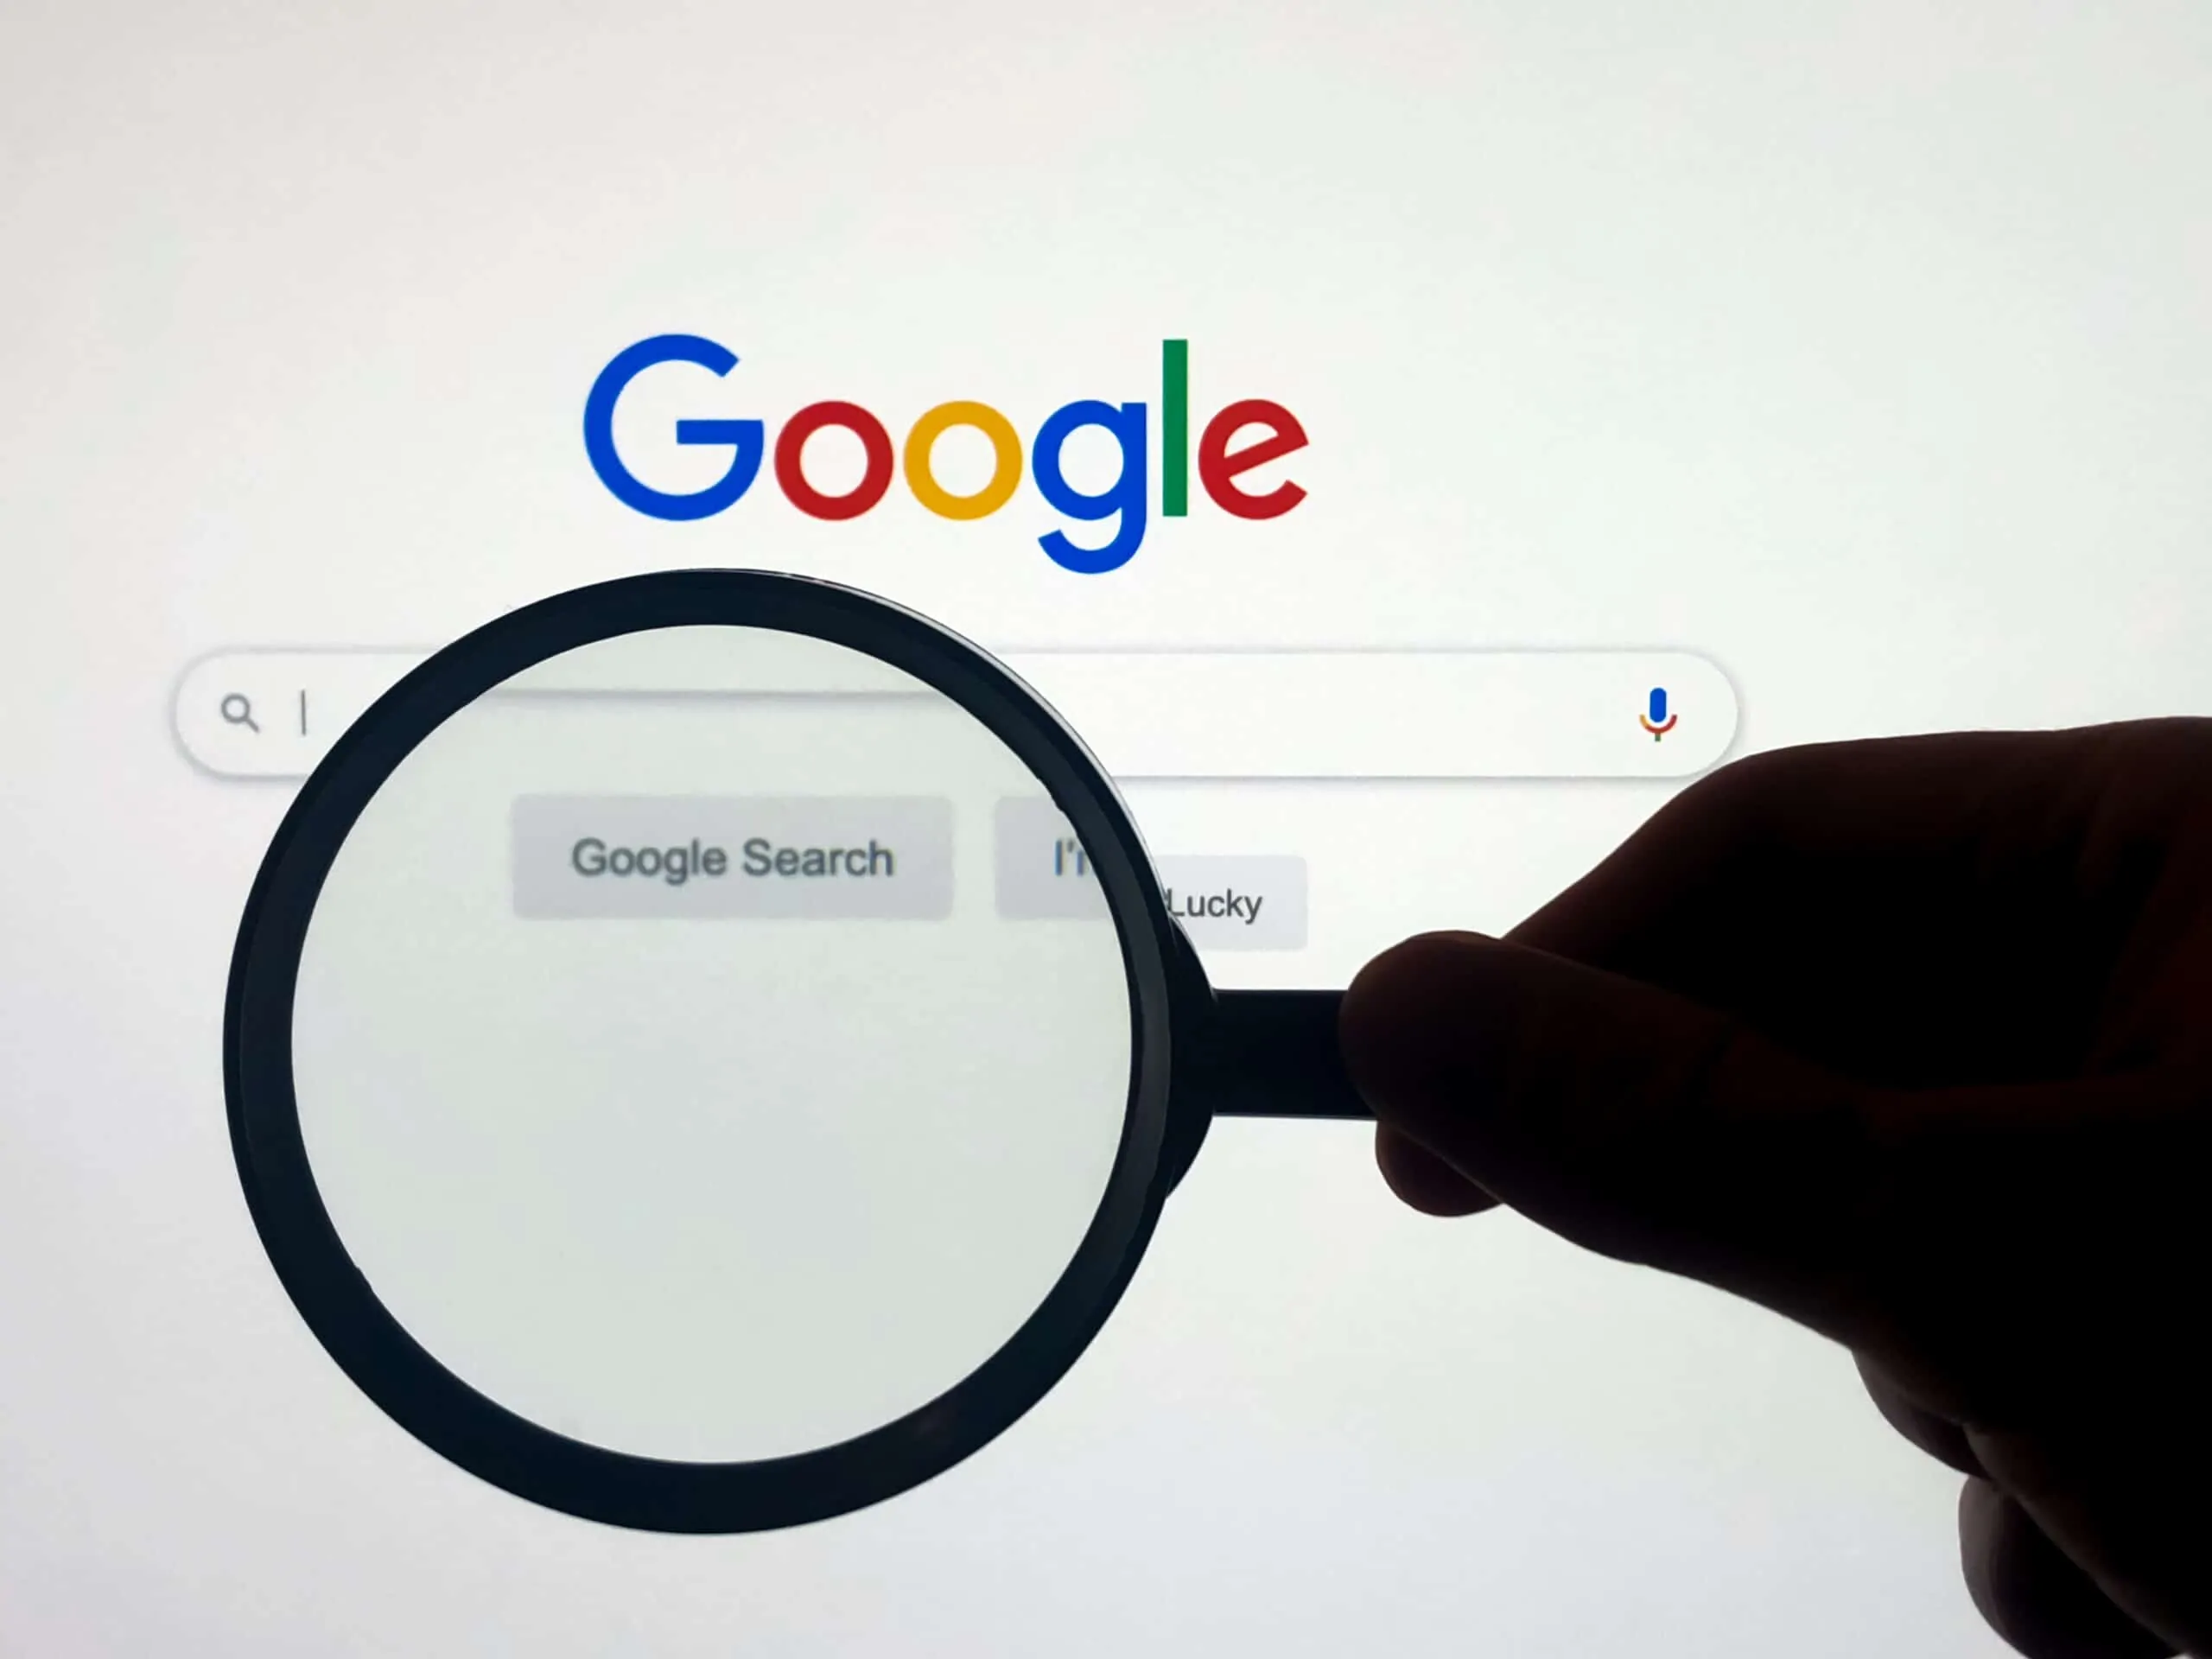 How to Turn Off Safe Search on Google